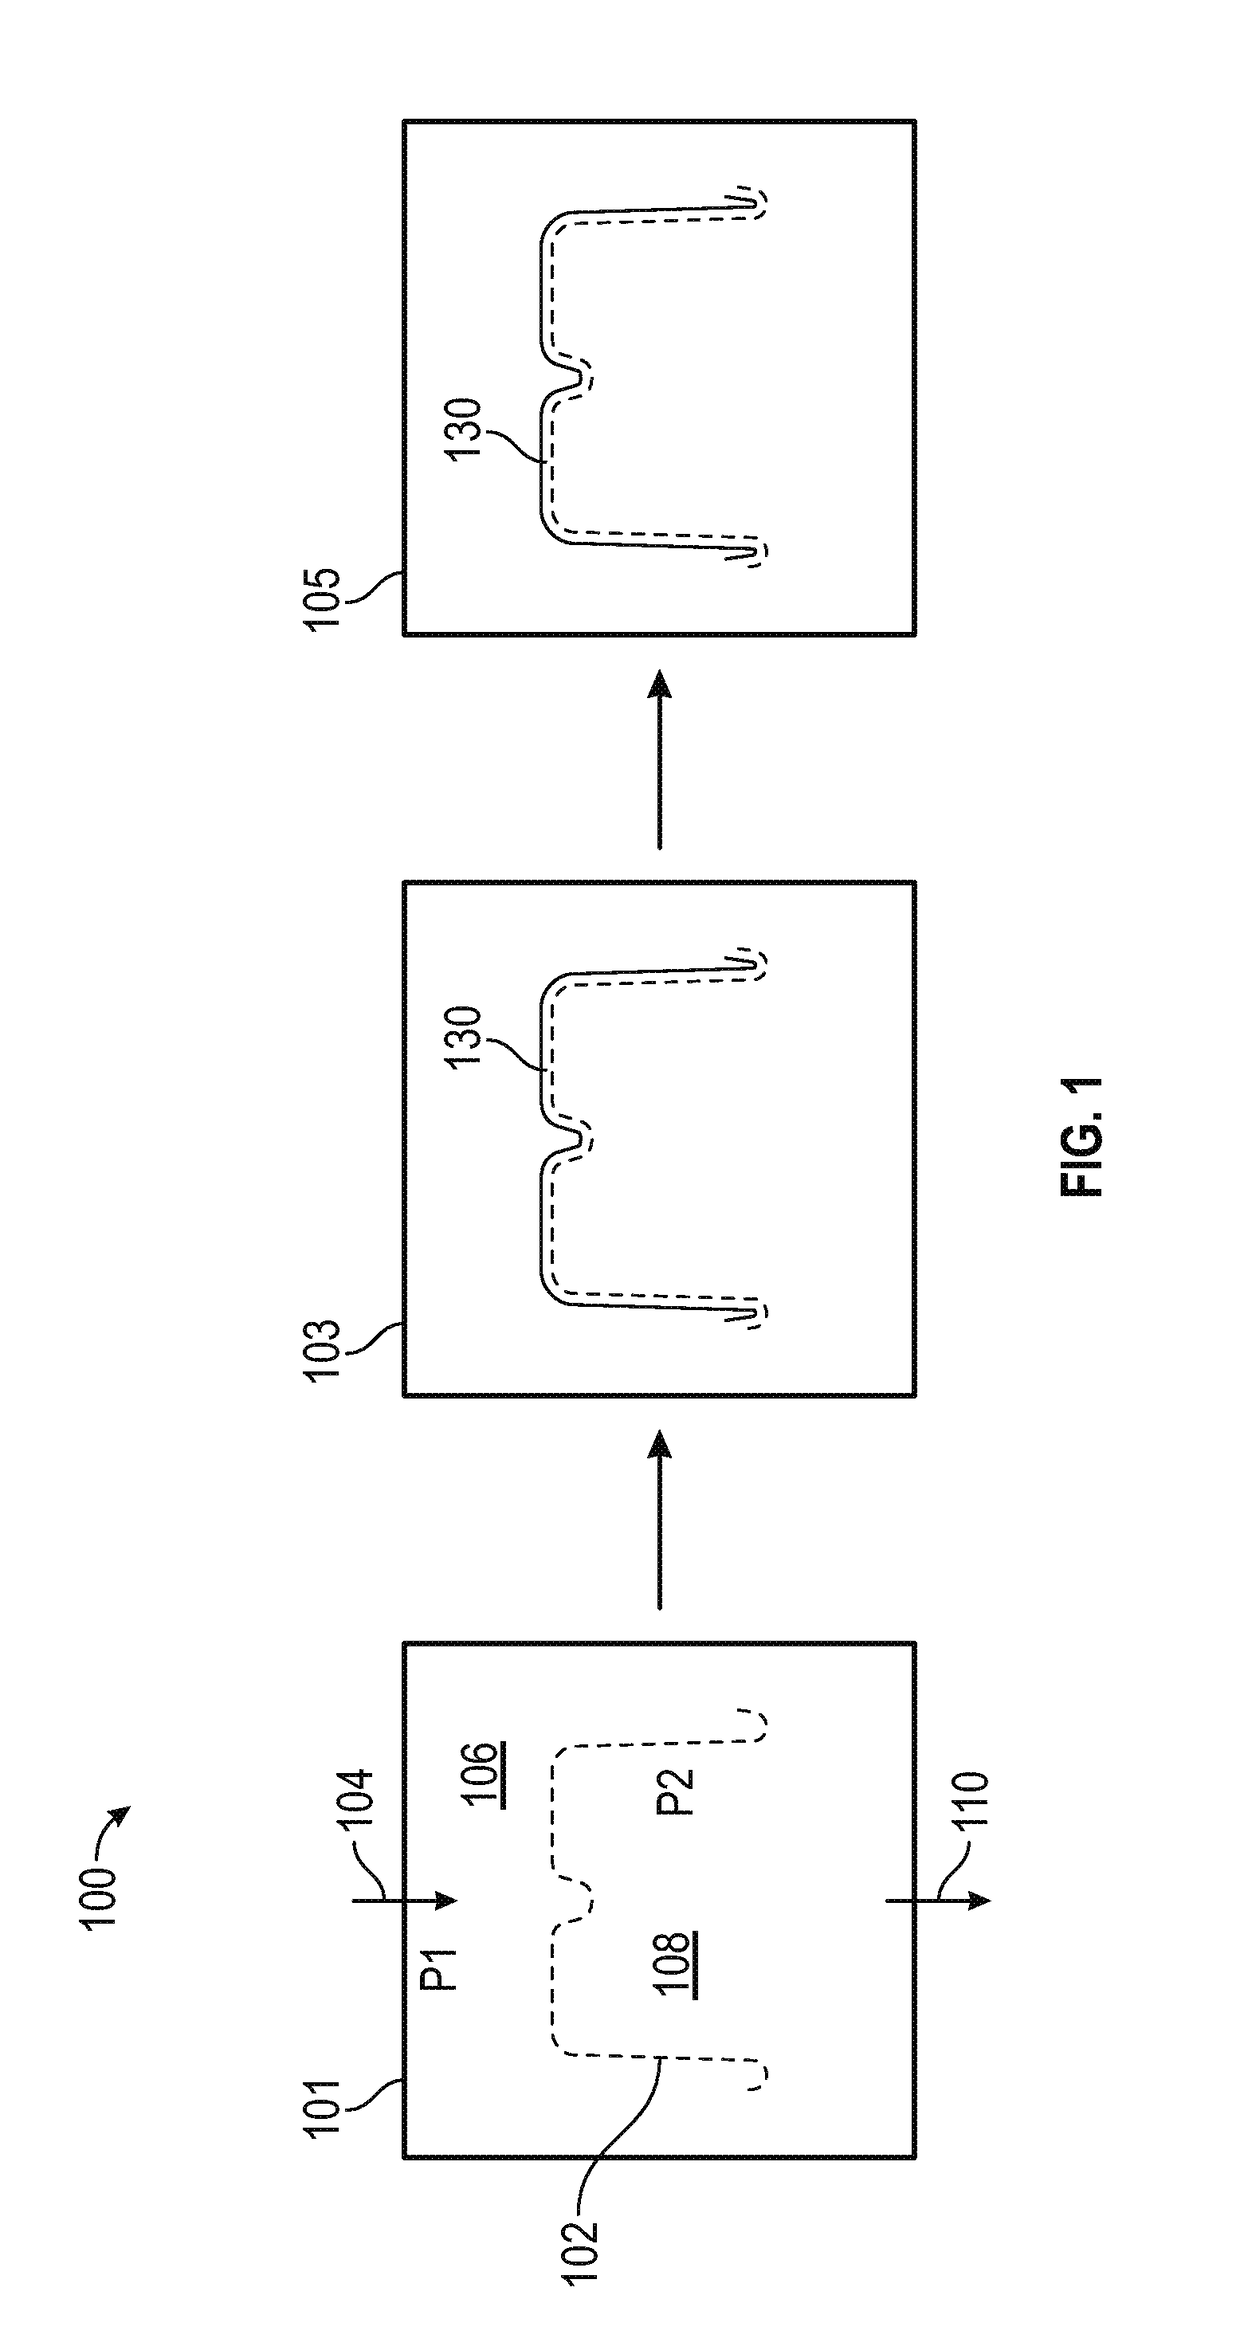 Method for manufacturing microwavable food containers